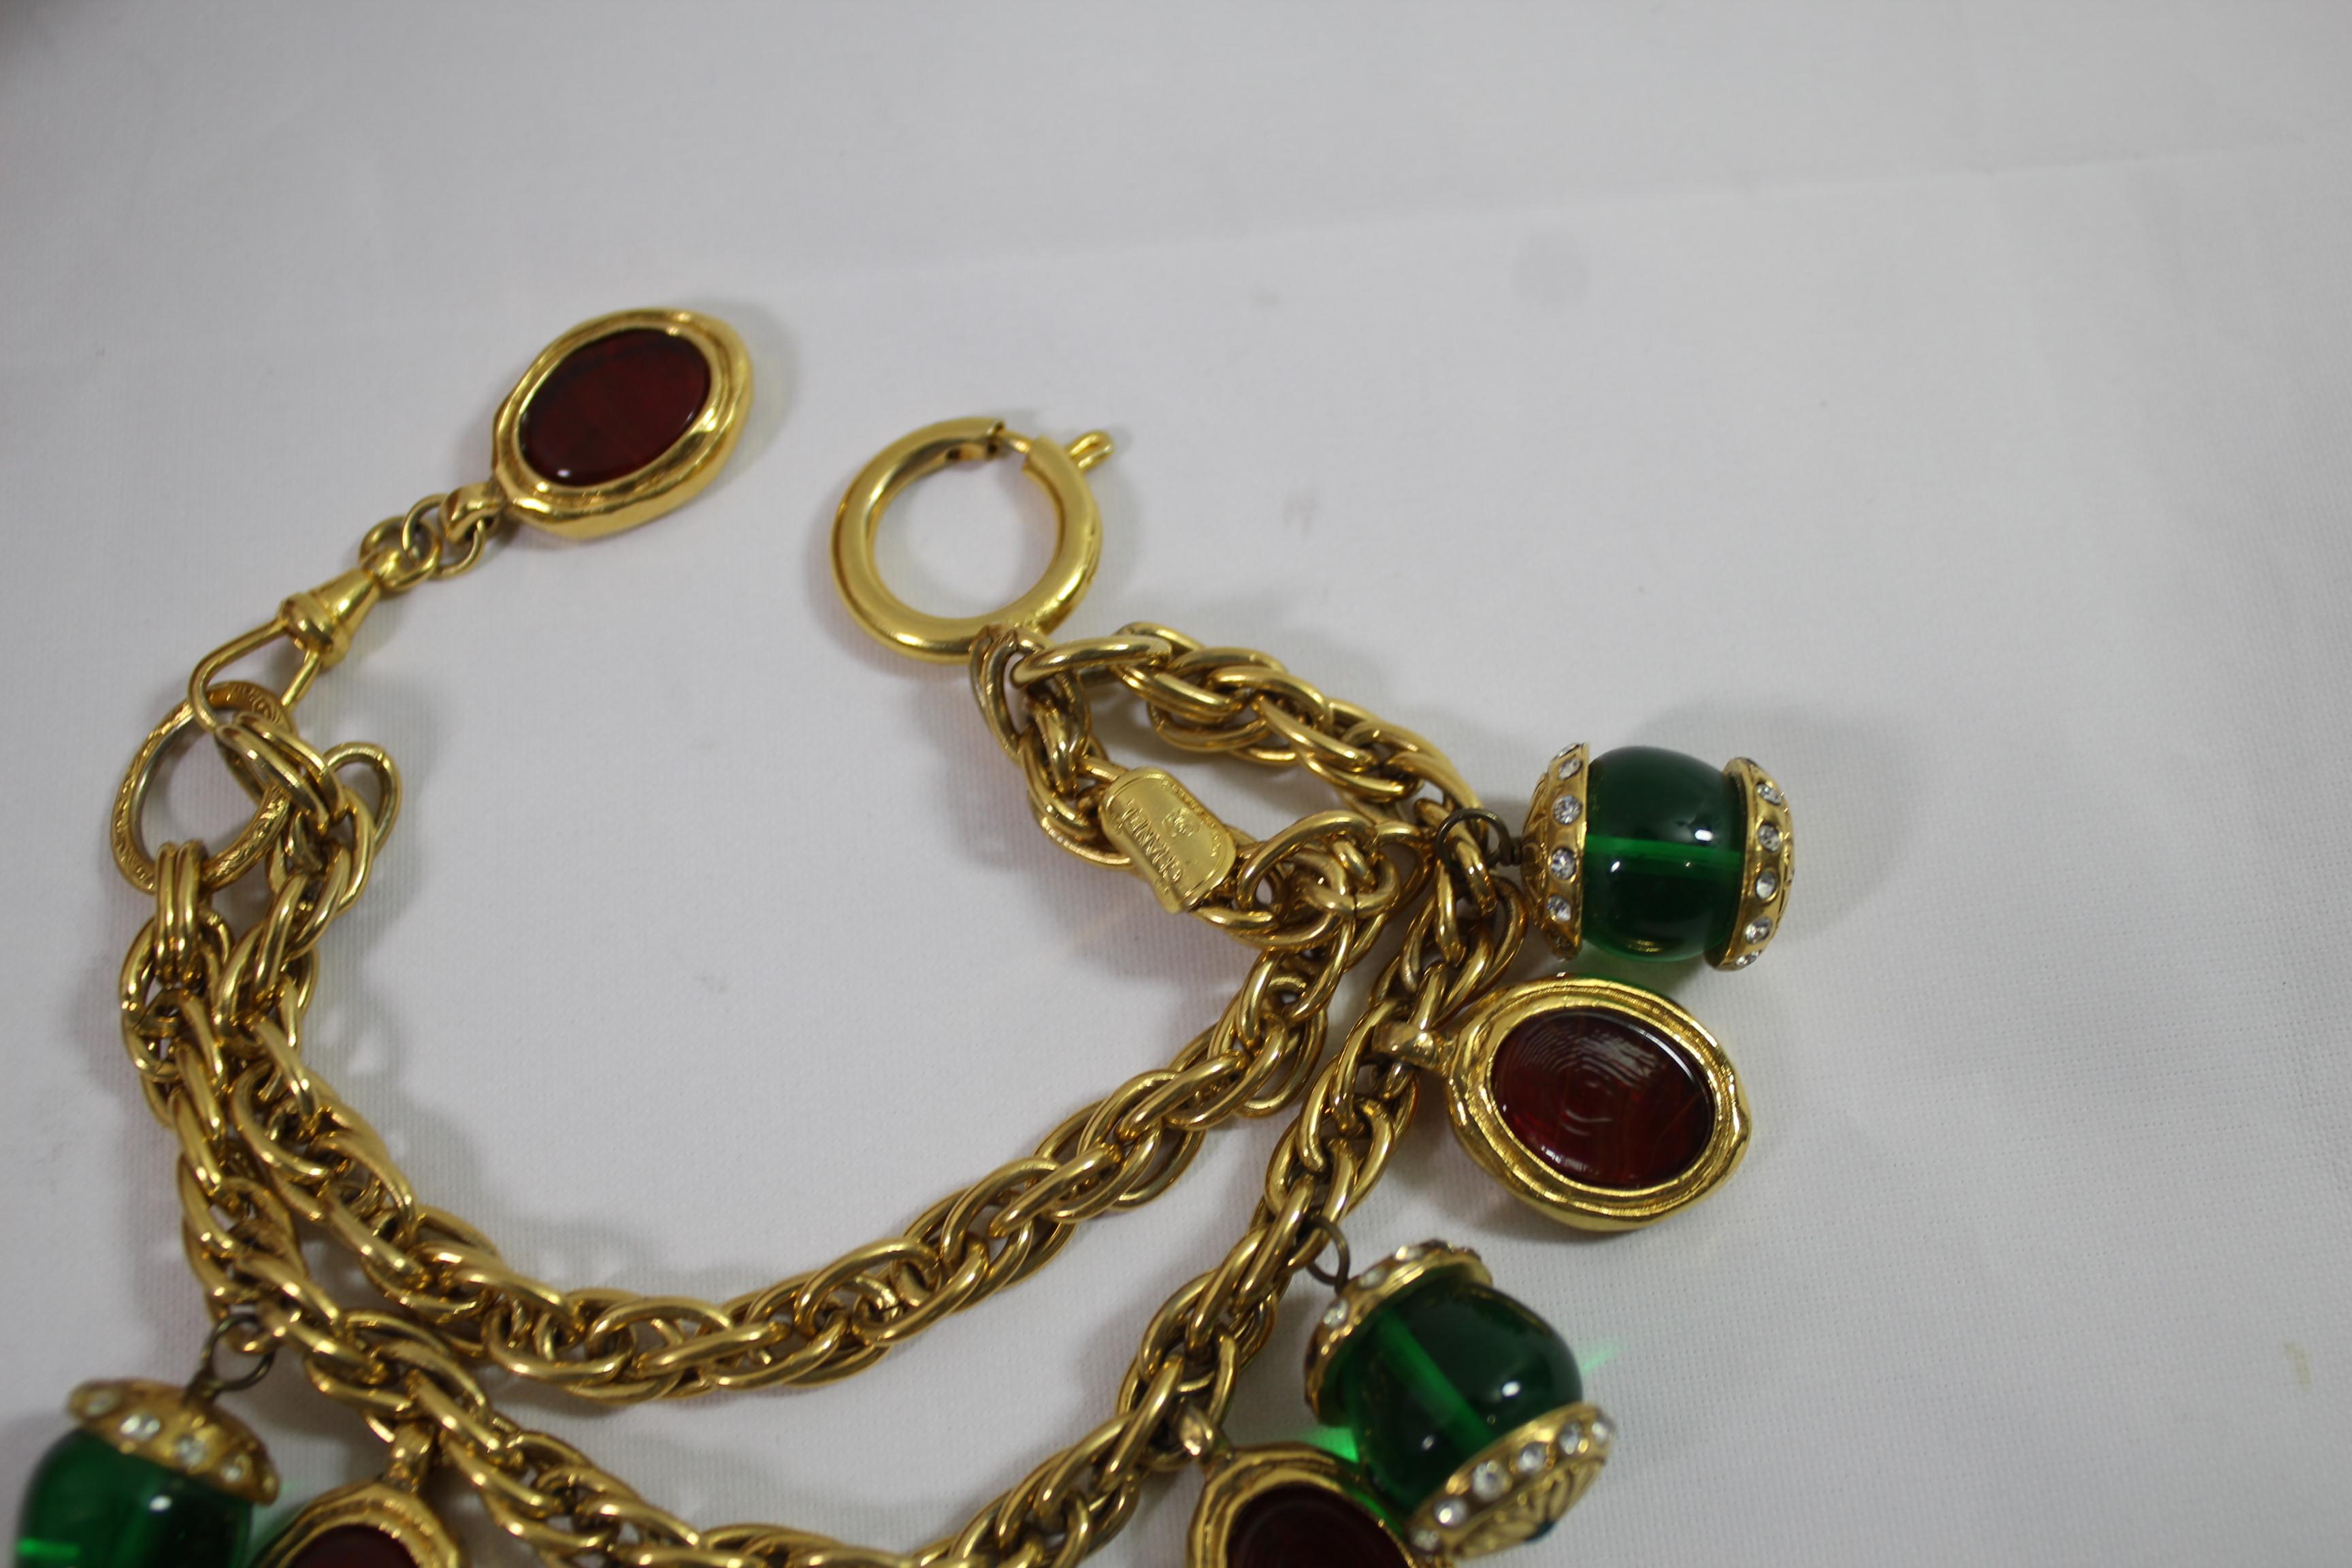 Bracelet Chanel Gripoix in gold plated metal and charms. really good condition. maximum size 18 cm

Really good vintage condition